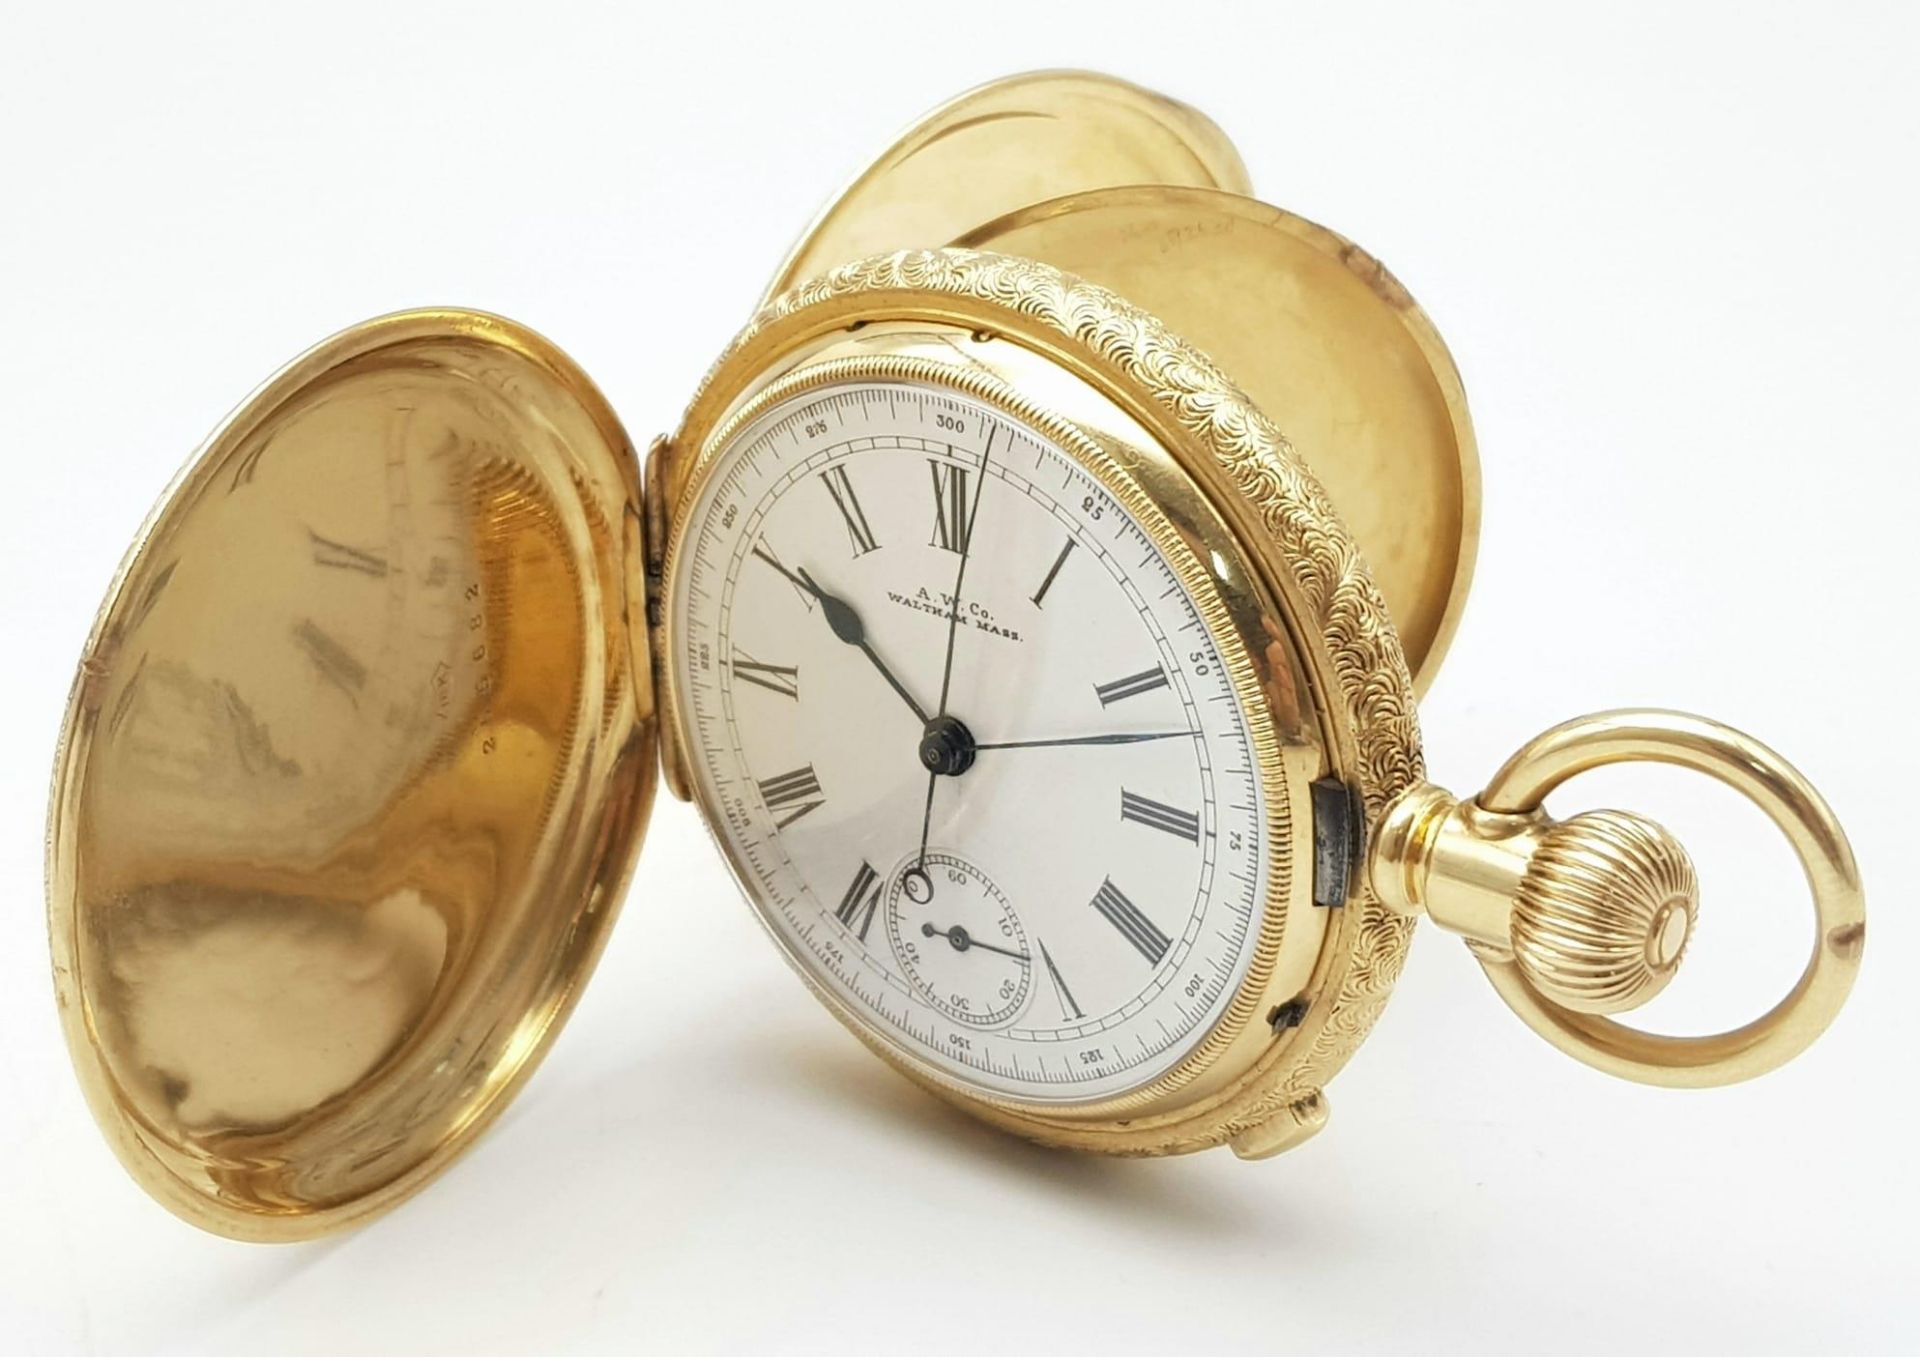 An Antique Waltham 18K Gold Full Hunter Pocket Watch. The case is ornately decorated in a floral - Bild 2 aus 13